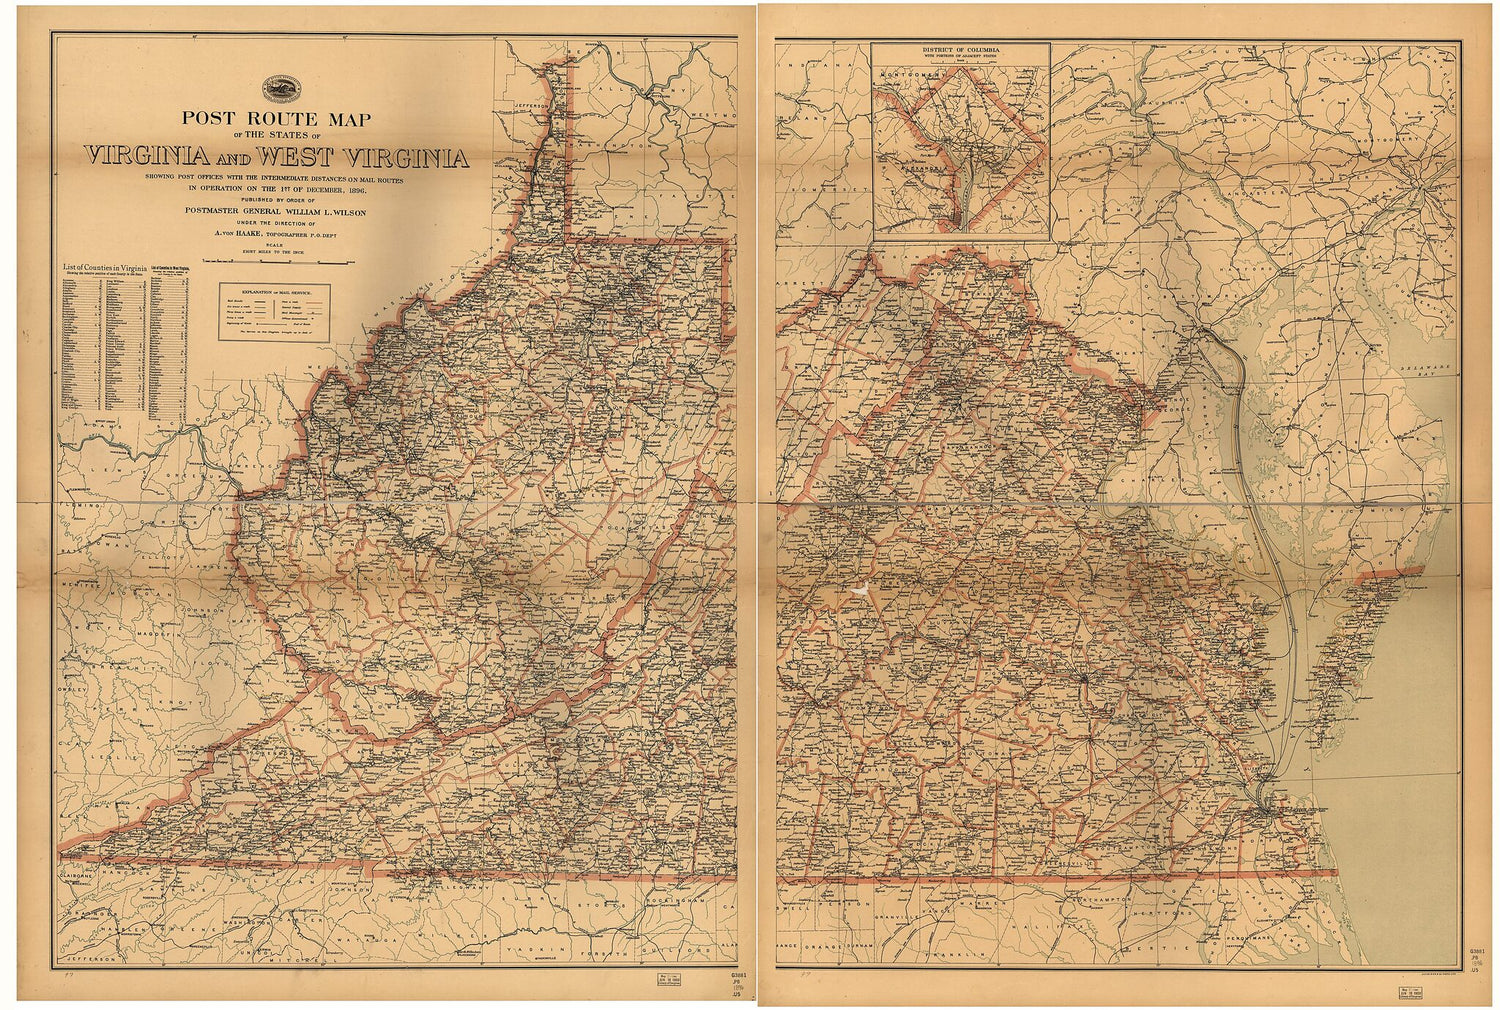 This old map of Post Route Map of the States of Virginia and West Virginia : Showing Post Offices With the Intermediate Distances and Mail Routes In Operation On the 1st of September, from 1896 was created by  United States. Post Office Department, A. Vo